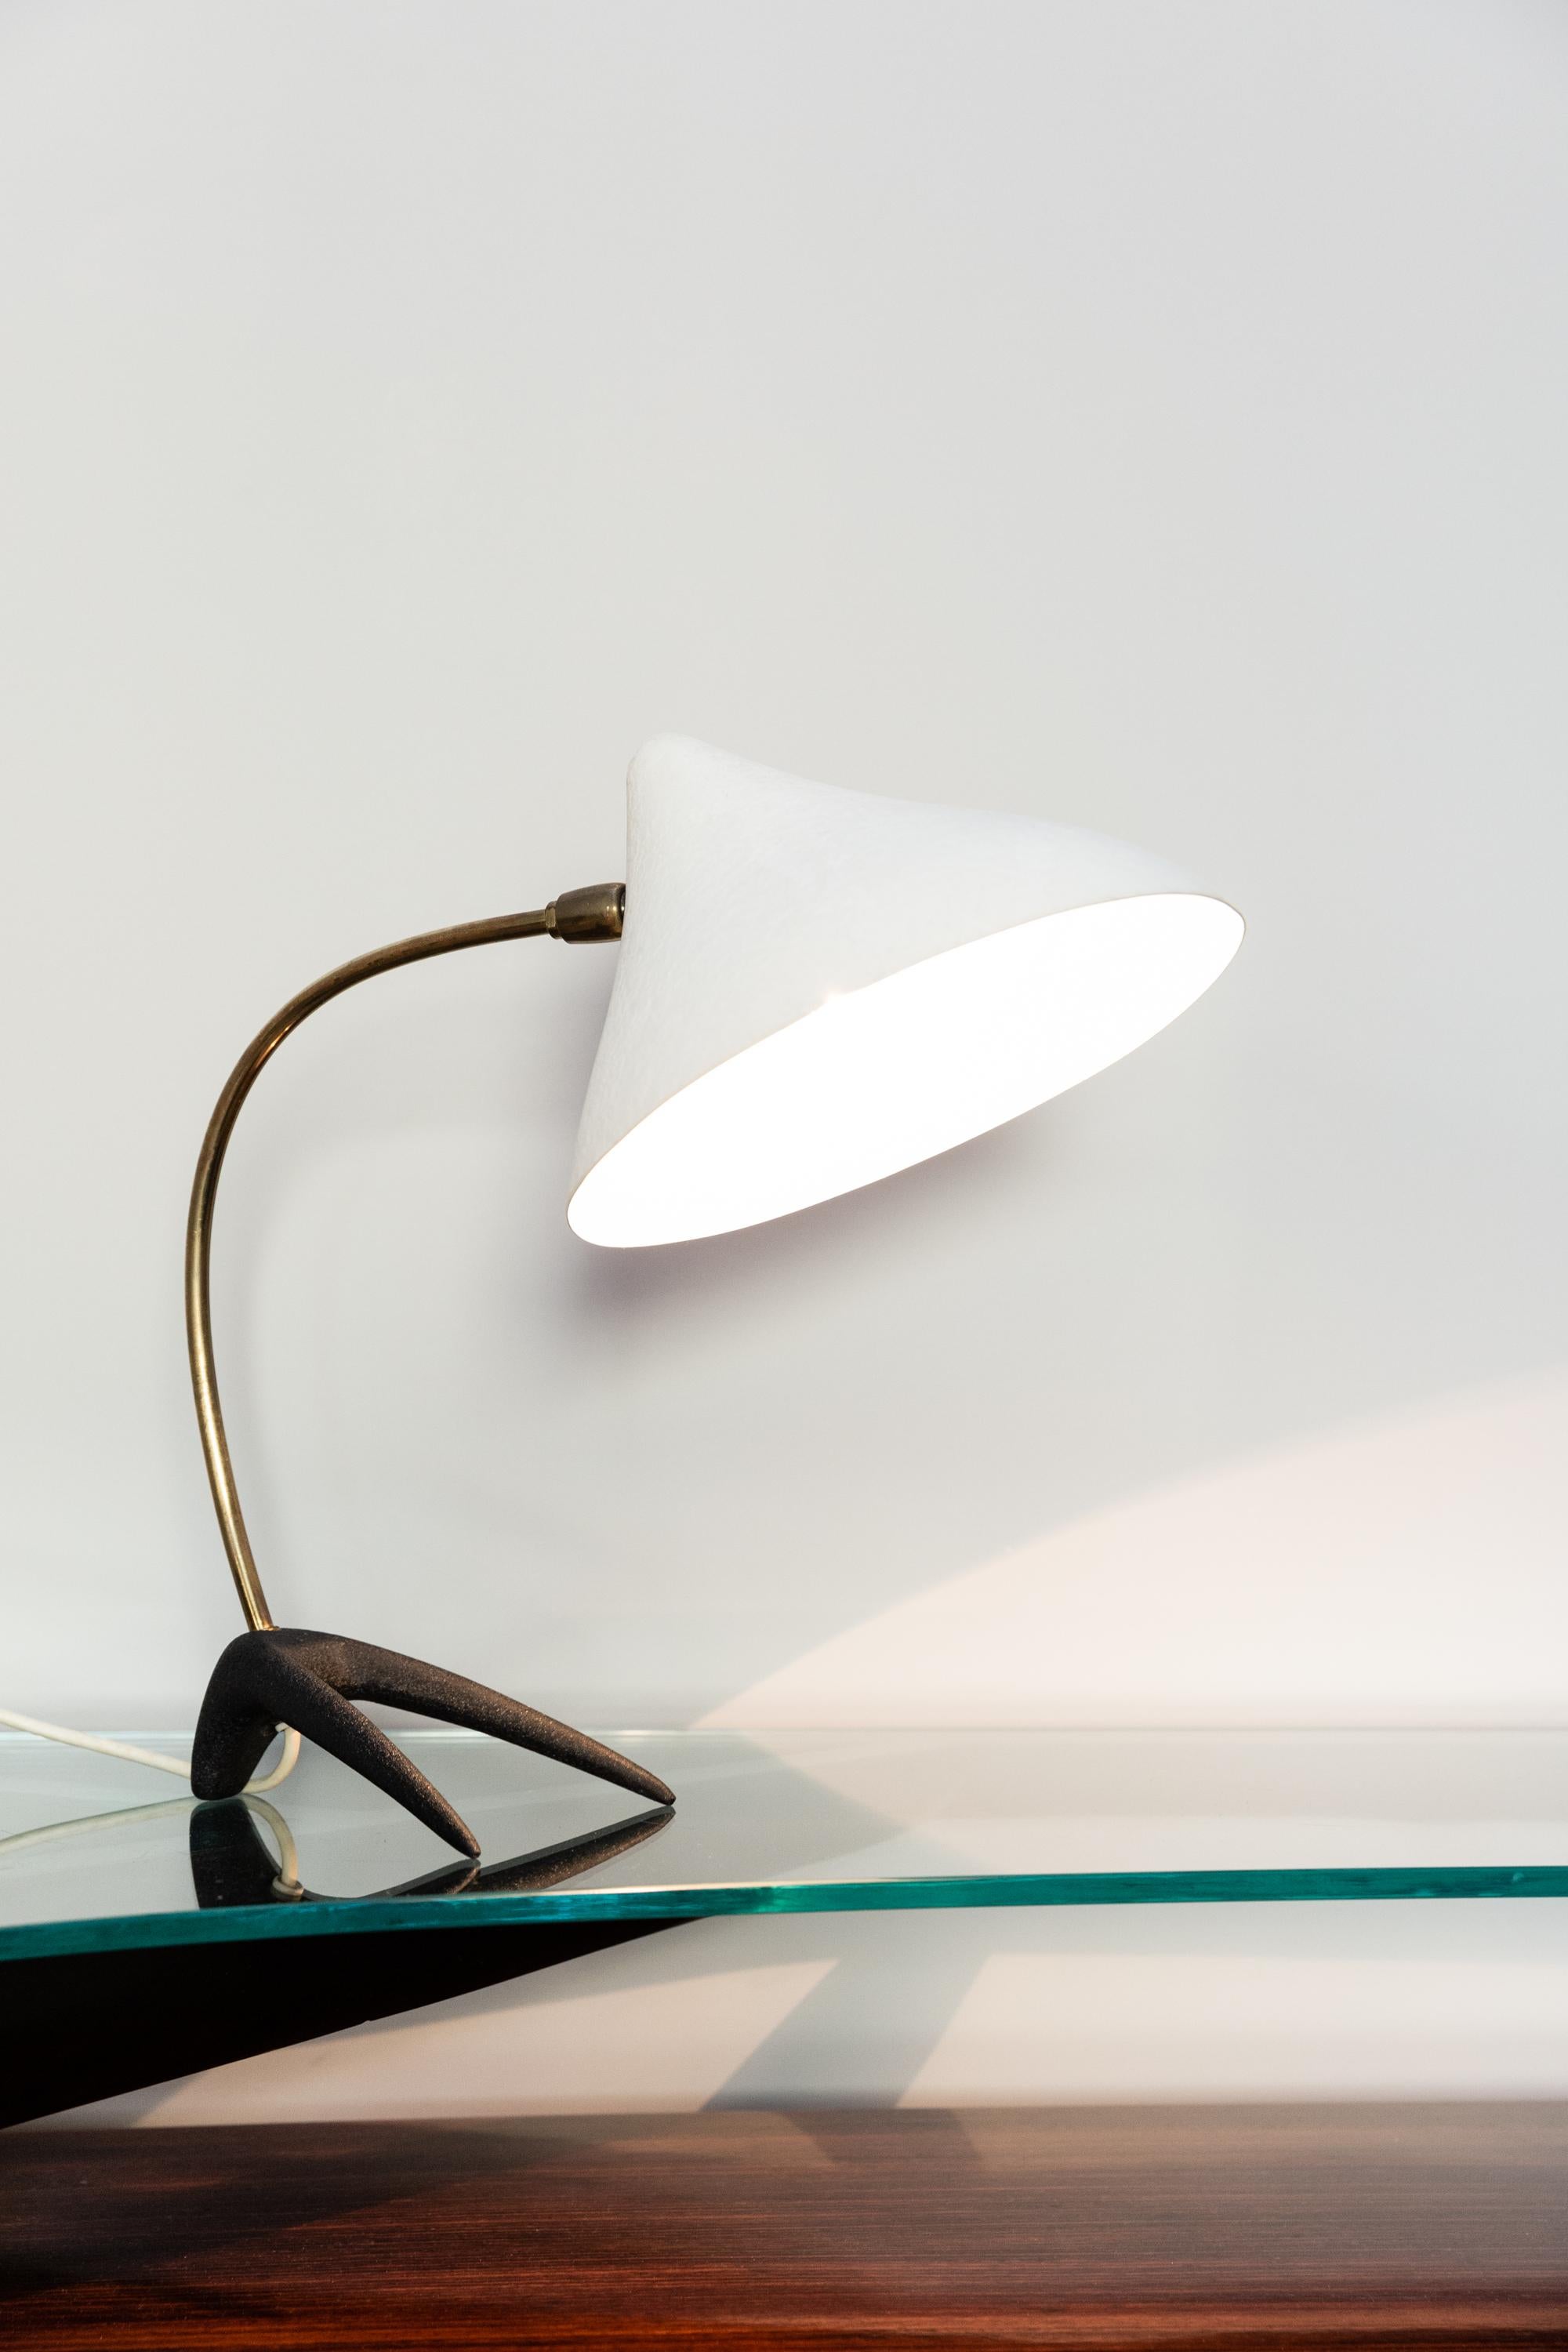 Table lamp by Louis Kalff for Philips, Netherlands circa 1950, aluminum shade in lacquered white color, 